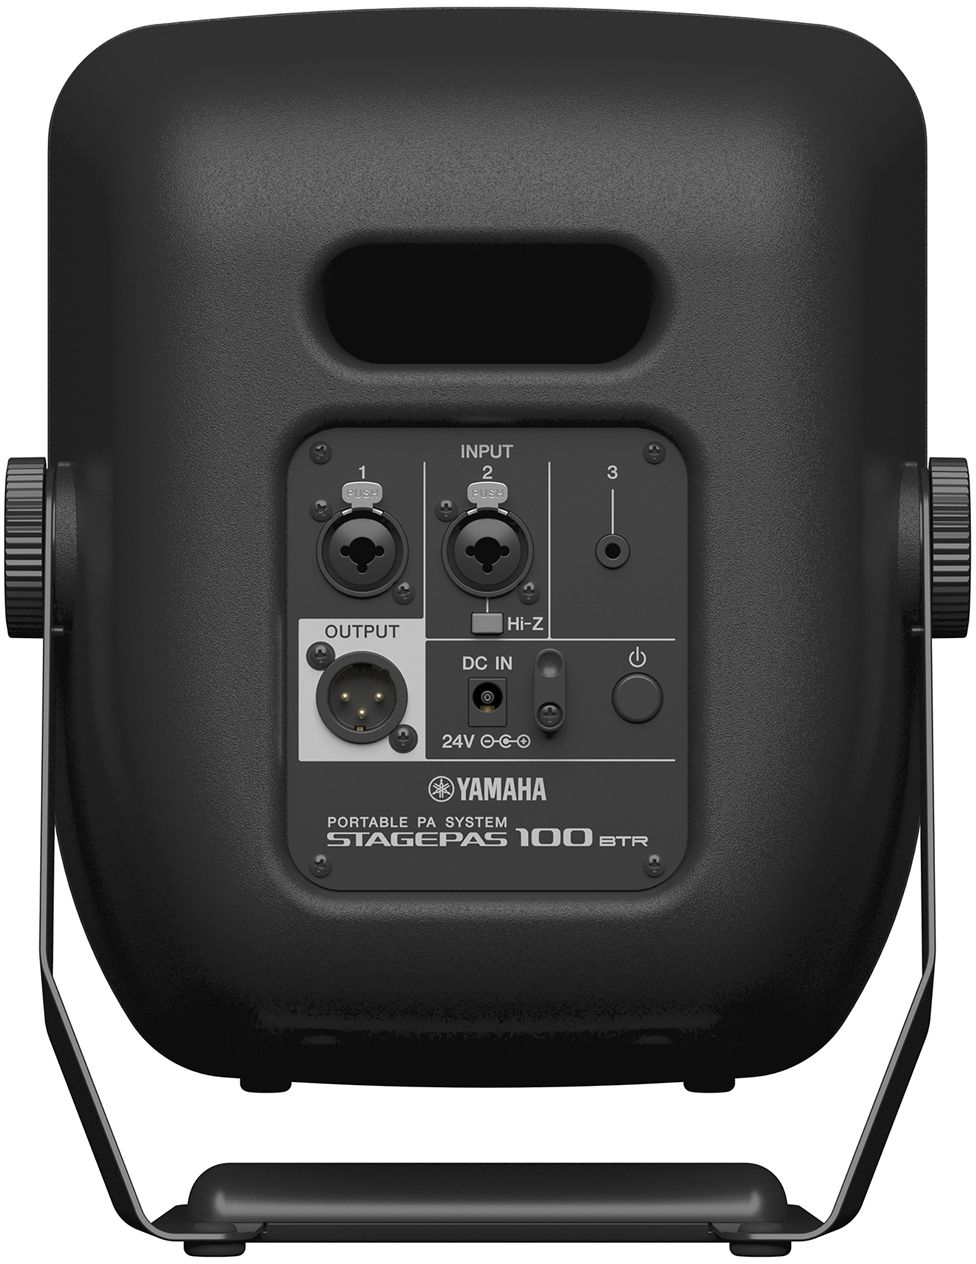 Yamaha Stagepas 100 - Portable PA system - Variation 2